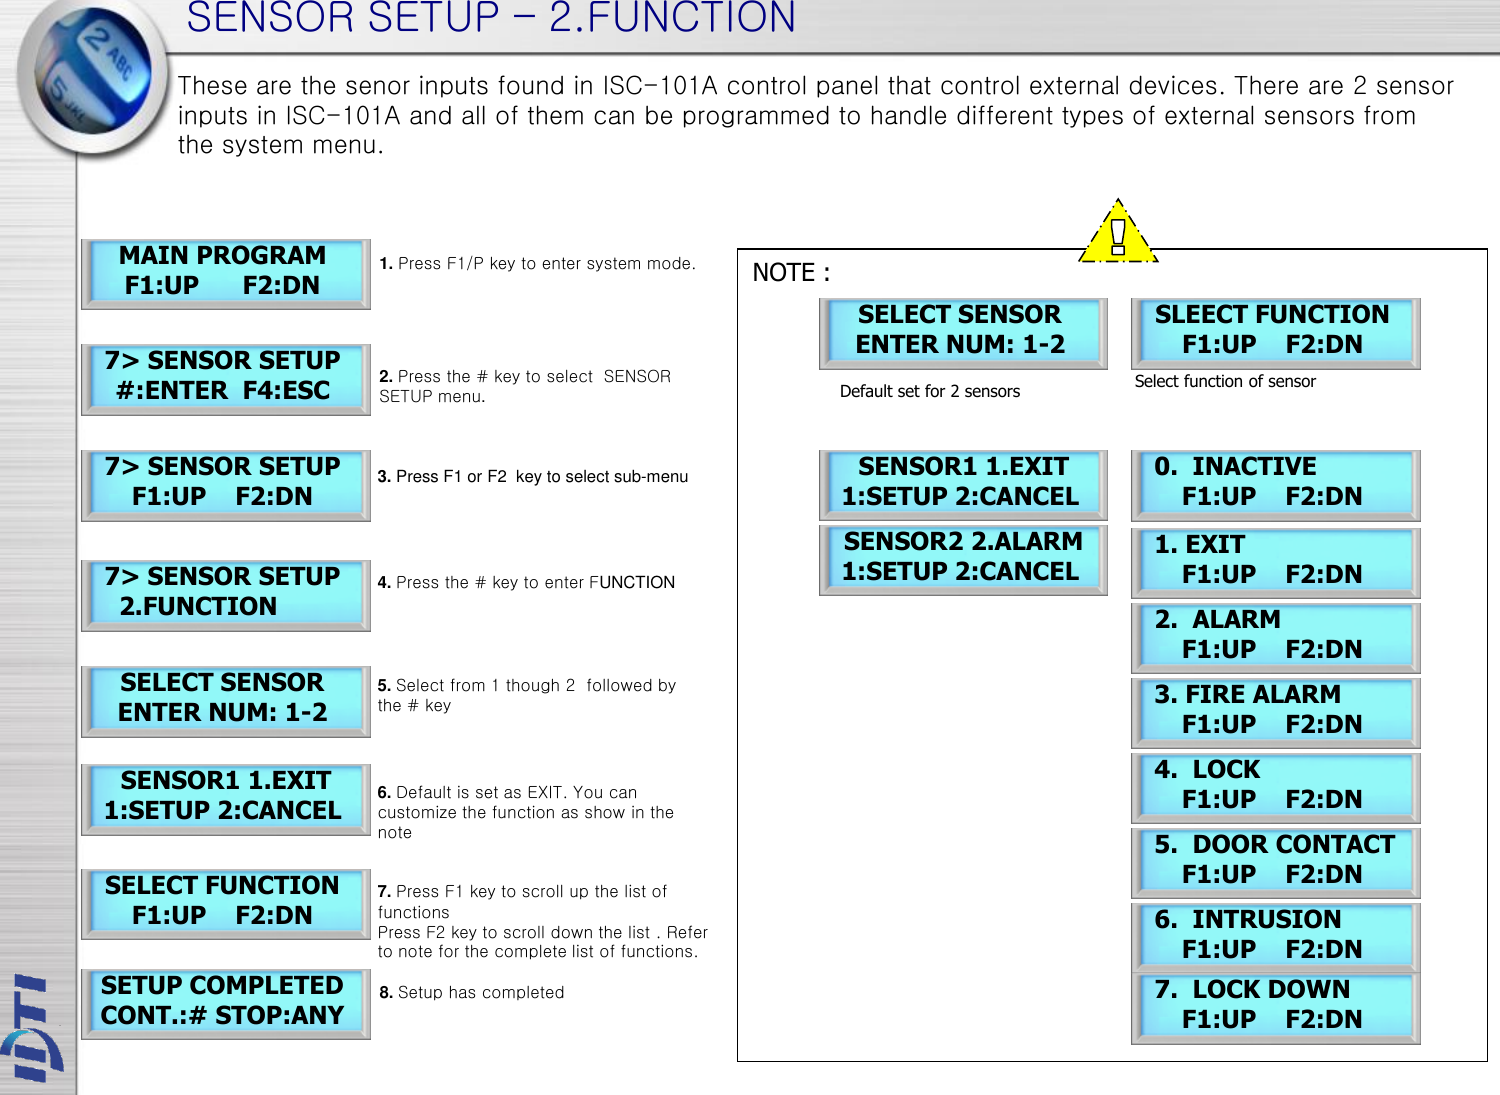 SENSOR SETUP – 2.FUNCTION 7&gt; SENSOR SETUP     2.FUNCTION SELECT SENSOR ENTER NUM: 1-2 MAIN PROGRAM F1:UP      F2:DN 7&gt; SENSOR SETUP #:ENTER  F4:ESC 7&gt; SENSOR SETUP F1:UP    F2:DN  SENSOR1 1.EXIT 1:SETUP 2:CANCEL SELECT FUNCTION F1:UP    F2:DN   1. EXIT F1:UP    F2:DN   2.  ALARM F1:UP    F2:DN   3. FIRE ALARM F1:UP    F2:DN   4.  LOCK F1:UP    F2:DN   5.  DOOR CONTACT F1:UP    F2:DN   6.  INTRUSION F1:UP    F2:DN   7.  LOCK DOWN F1:UP    F2:DN SLEECT FUNCTION F1:UP    F2:DN SELECT SENSOR ENTER NUM: 1-2  SENSOR1 1.EXIT 1:SETUP 2:CANCEL  SENSOR2 2.ALARM 1:SETUP 2:CANCEL SETUP COMPLETED CONT.:# STOP:ANY Default set for 2 sensors  Select function of sensor  These are the senor inputs found in ISC-101A control panel that control external devices. There are 2 sensor inputs in ISC-101A and all of them can be programmed to handle different types of external sensors from the system menu.  NOTE :                  1. Press F1/P key to enter system mode. 2. Press the # key to select  SENSOR SETUP menu. 4. Press the # key to enter FUNCTION 5. Select from 1 though 2  followed by the # key 3. Press F1 or F2  key to select sub-menu 8. Setup has completed 6. Default is set as EXIT. You can customize the function as show in the note 7. Press F1 key to scroll up the list of functions Press F2 key to scroll down the list . Refer to note for the complete list of functions.   0.  INACTIVE F1:UP    F2:DN 